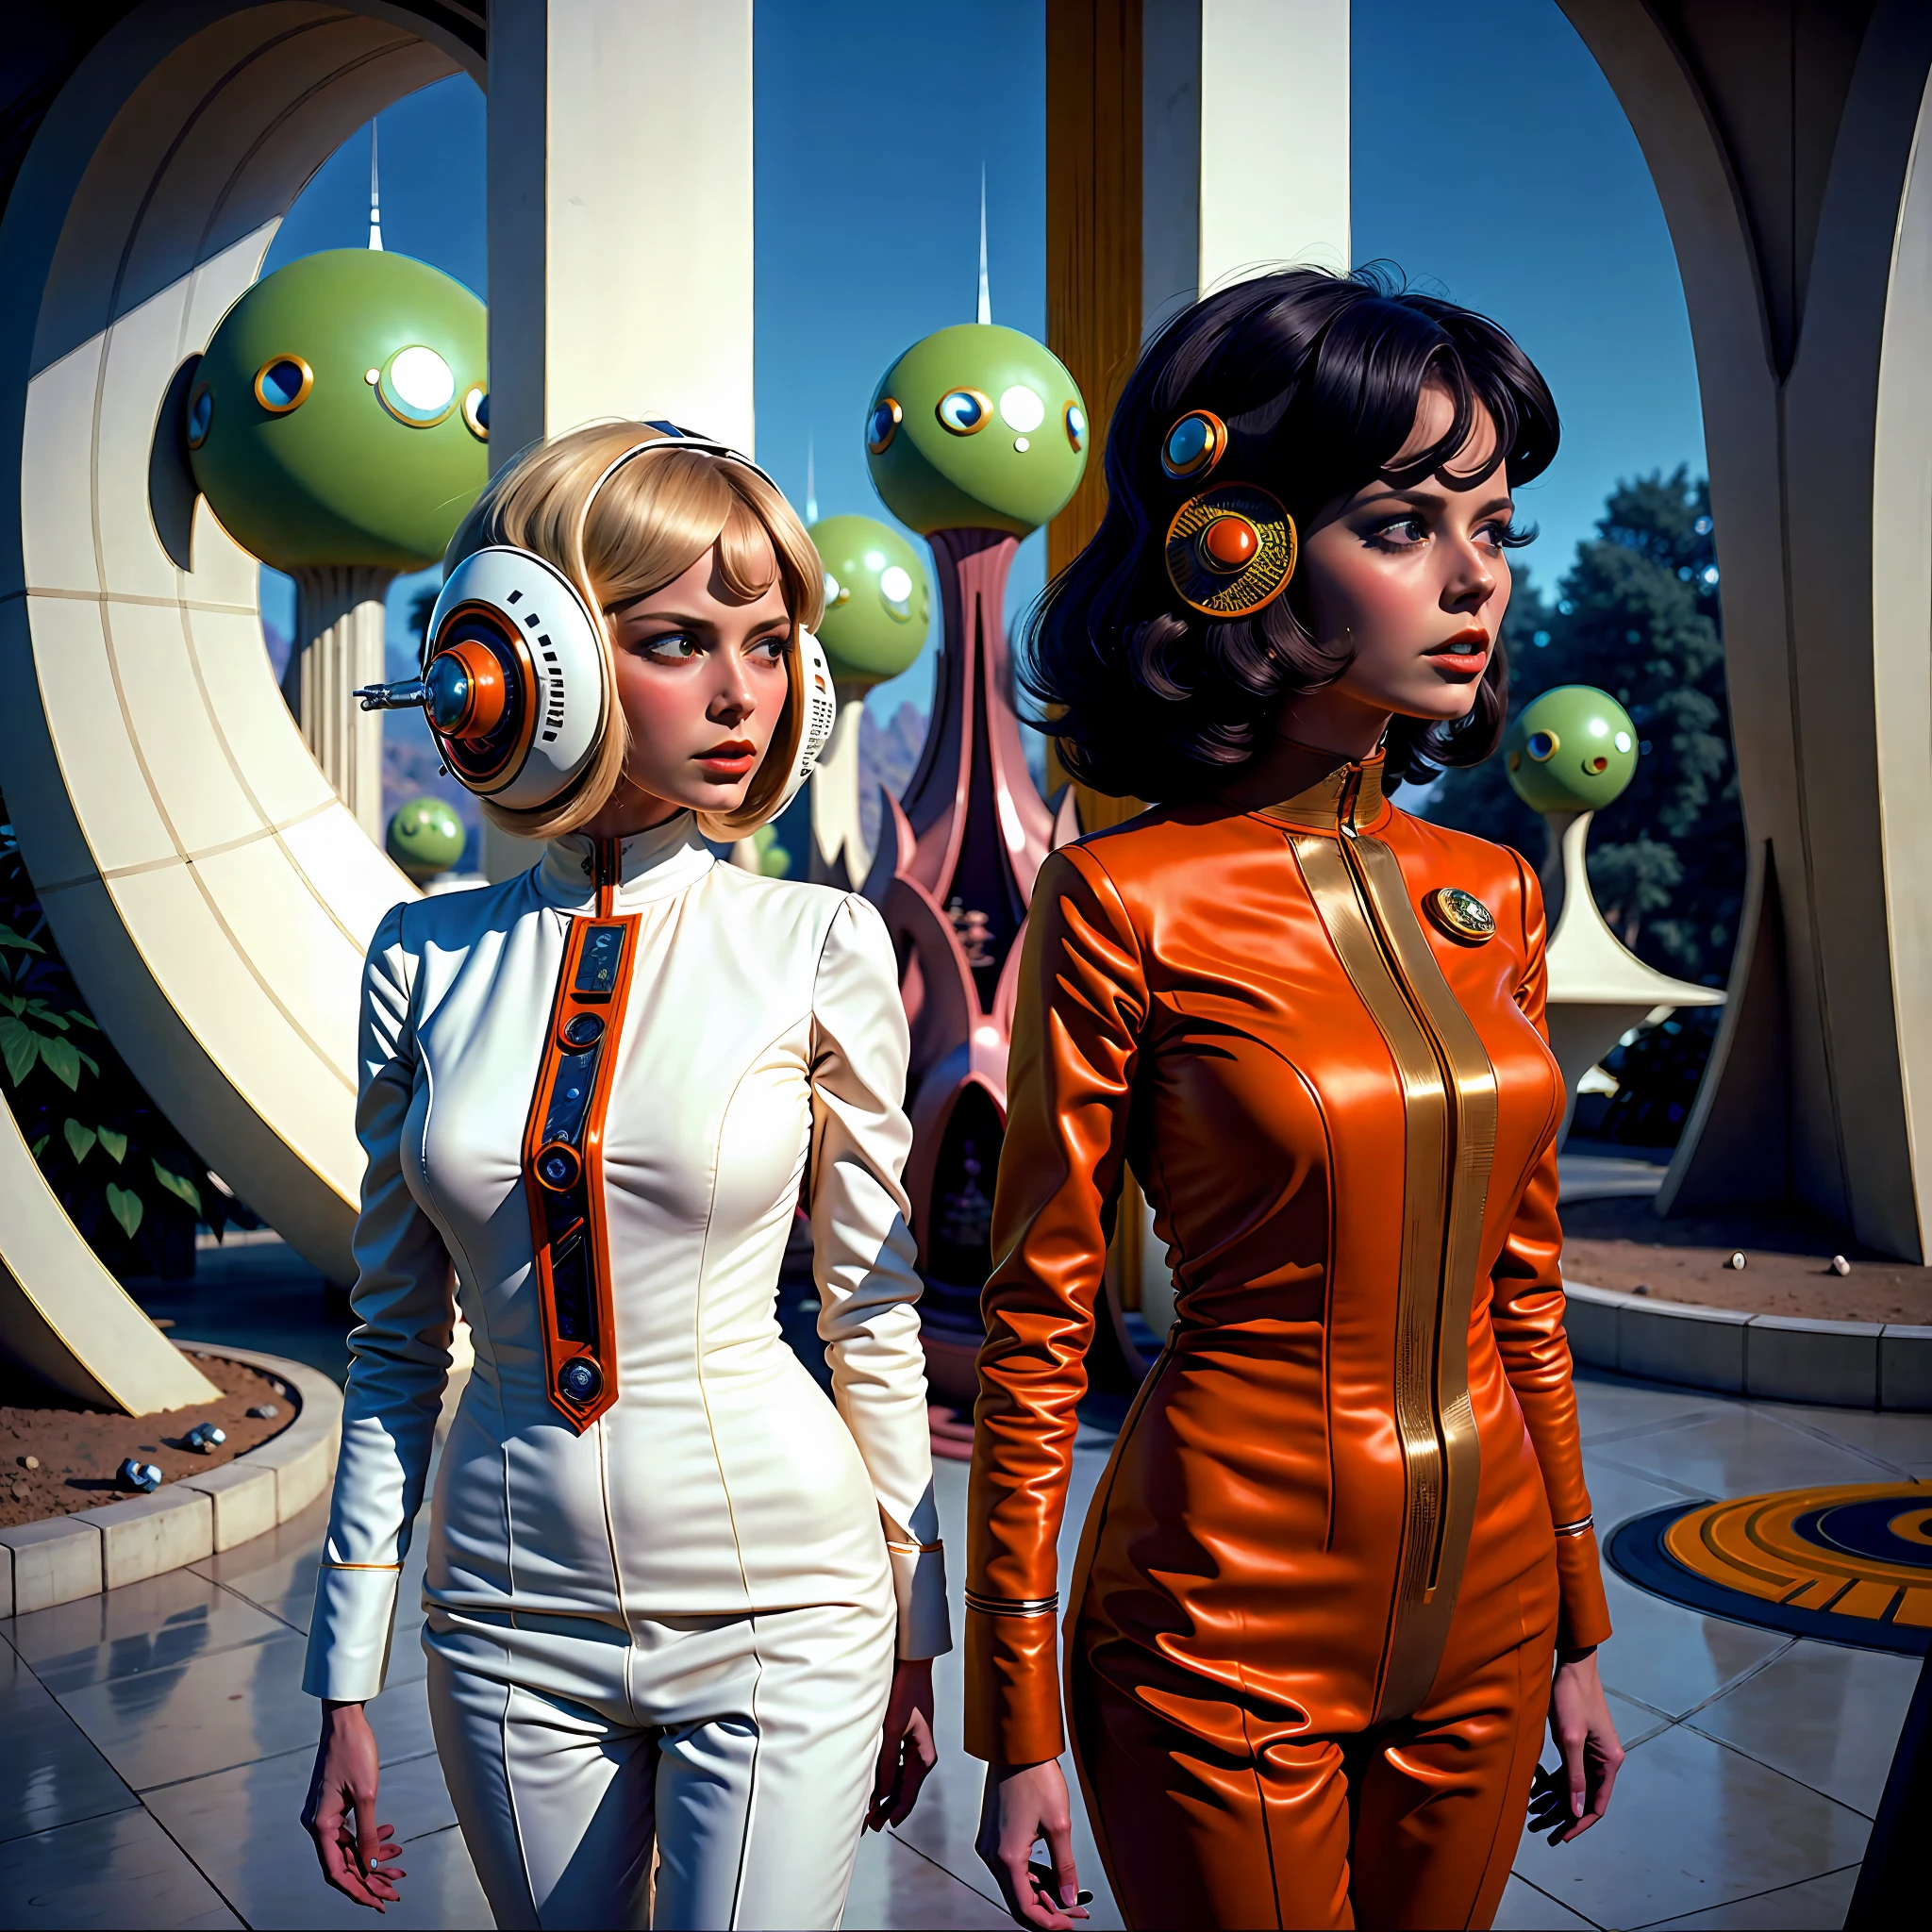 4k image from a 1970s science fiction film, imagem real, Estilo Stanley Kubrick, pastels colors, people wearing retro-futuristic fashion clothes and futuristic technological ornaments and devices in the cafeteria, luz natural, cinemactic, Psicodelia, futurista estranho, retro-futurista, photo-realistic, olhos reais, perfect hands, cabelo perfeito, ricos detalhes do rosto, hiper detalhado, hyper realistic, textura real da pele, texturas de tecido real, Sharp background details, sharp render, Sci-fi dos anos 1970, photo taken with an ARRI Alexa camera with panavision sphero 65 lens.